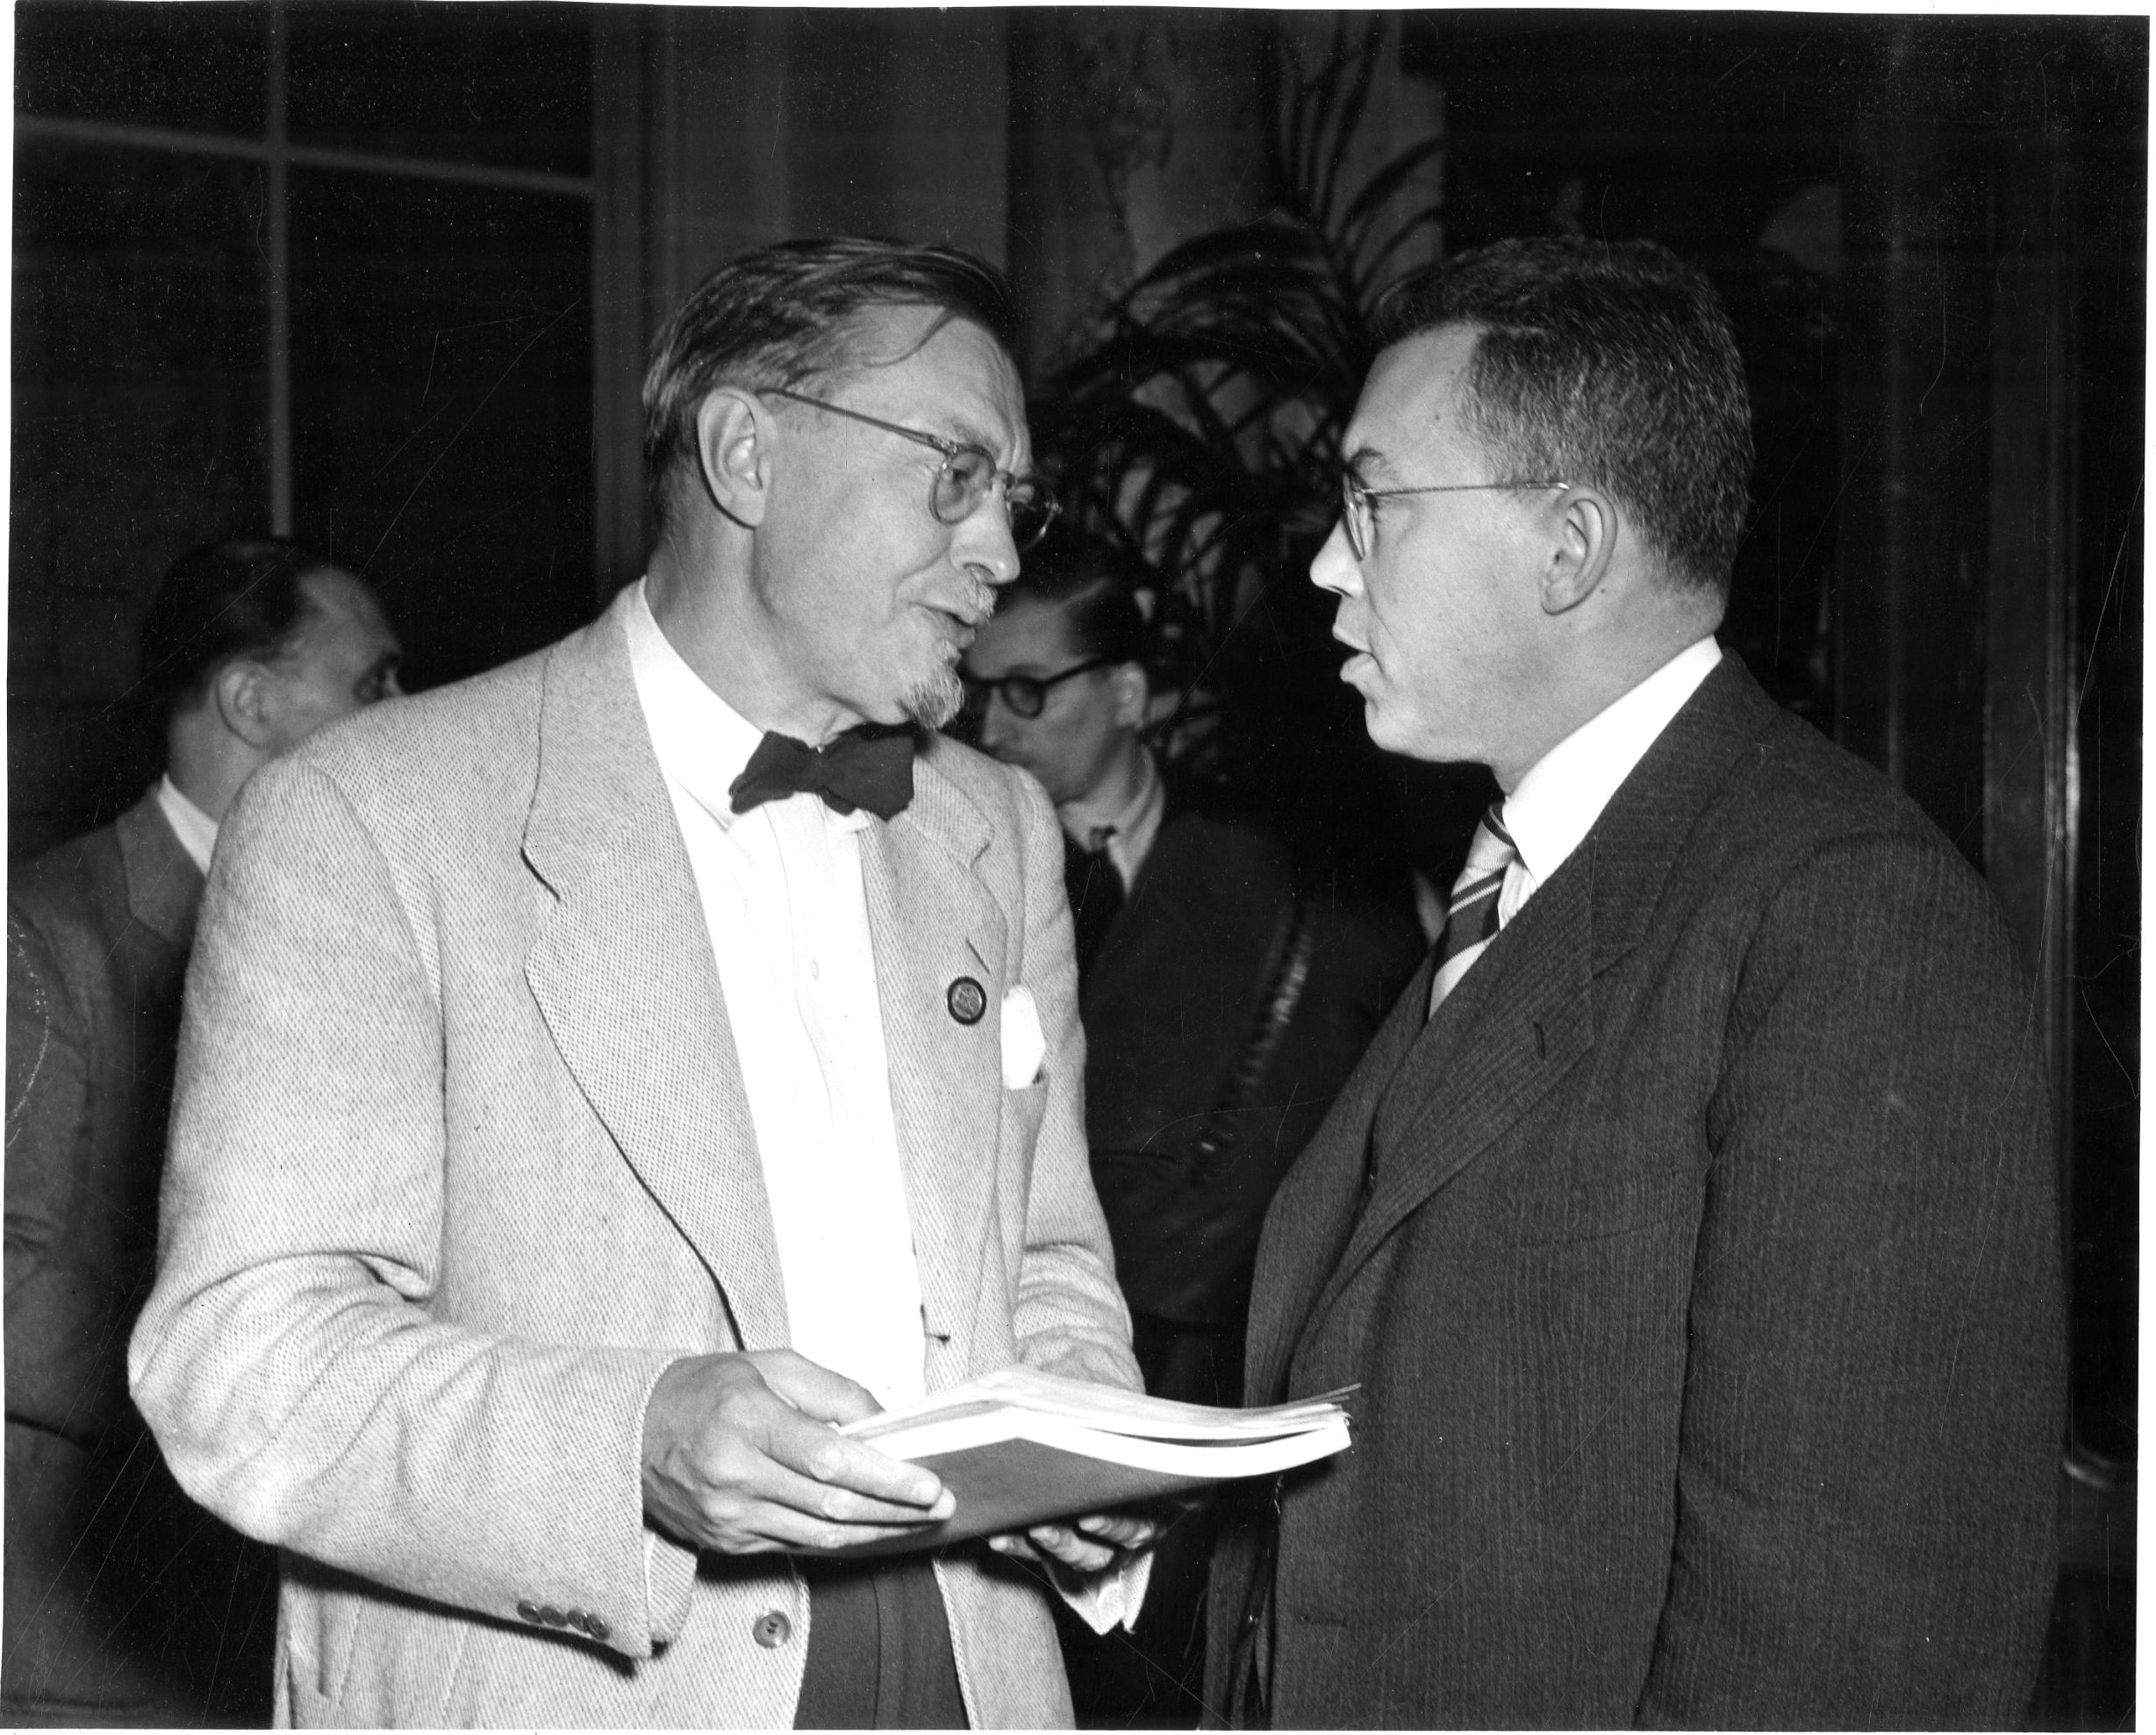 Dr. Howard Hanson (U.S.A) and Dr. L. H. Correa d’Azevedo (Brazil). UNESCO Fourth General Conference, Paris, September 19th/October 5th, 1949. Photo by the United States Information Service. Howard Hanson Collection.